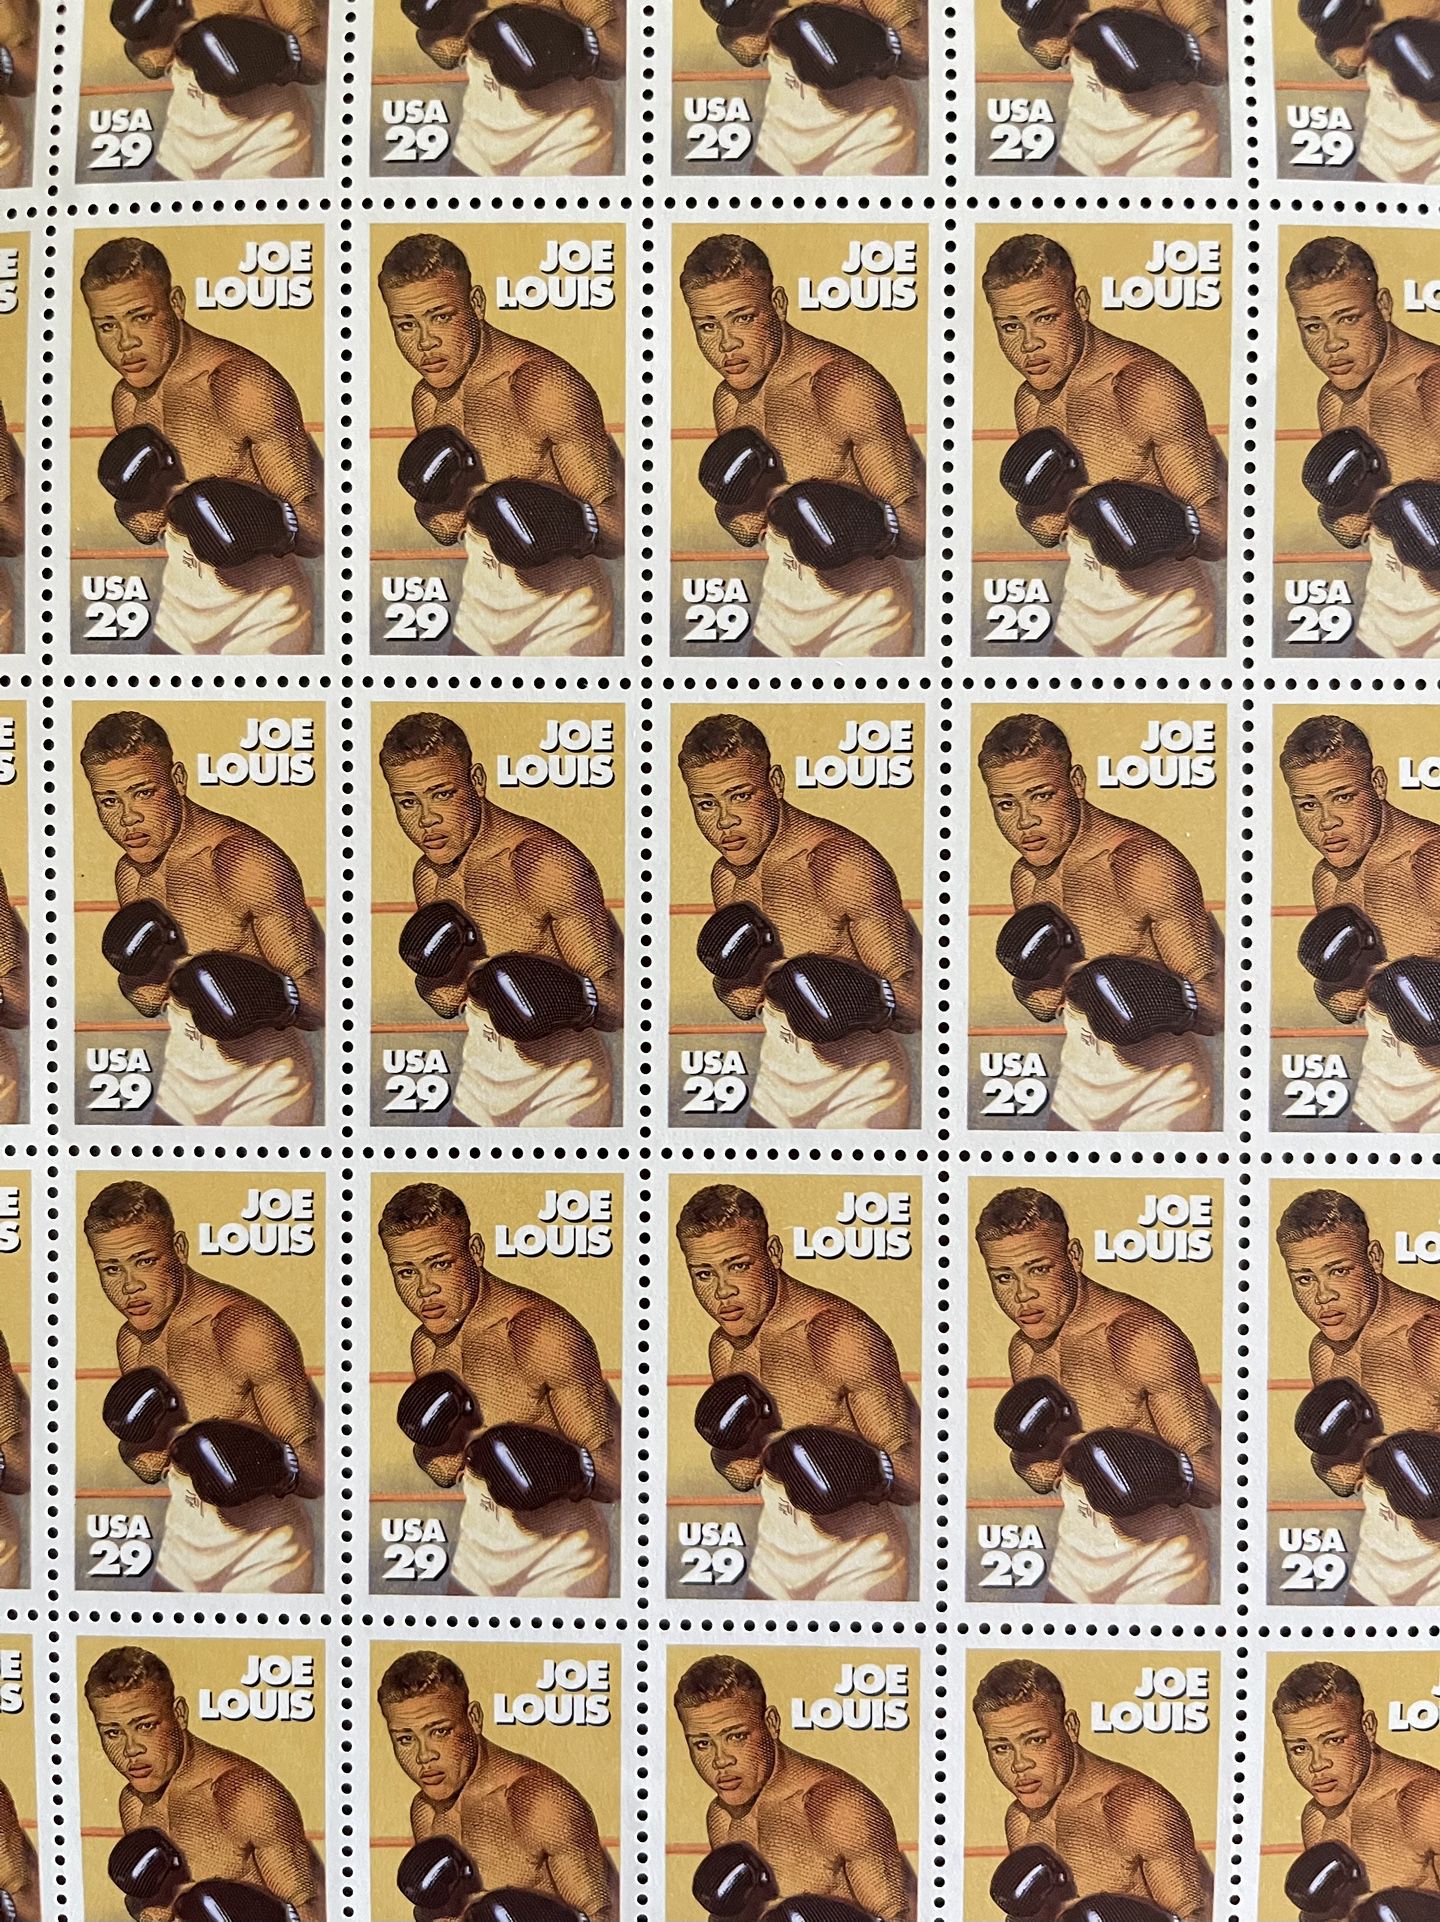 U.S. Postage Stamps Of All Time Great Heavyweight Boxing Champion Joe Louis Of The 1930s-1940s. Includes One Sheet Of 50 Stamps. Never Used. Mint. 